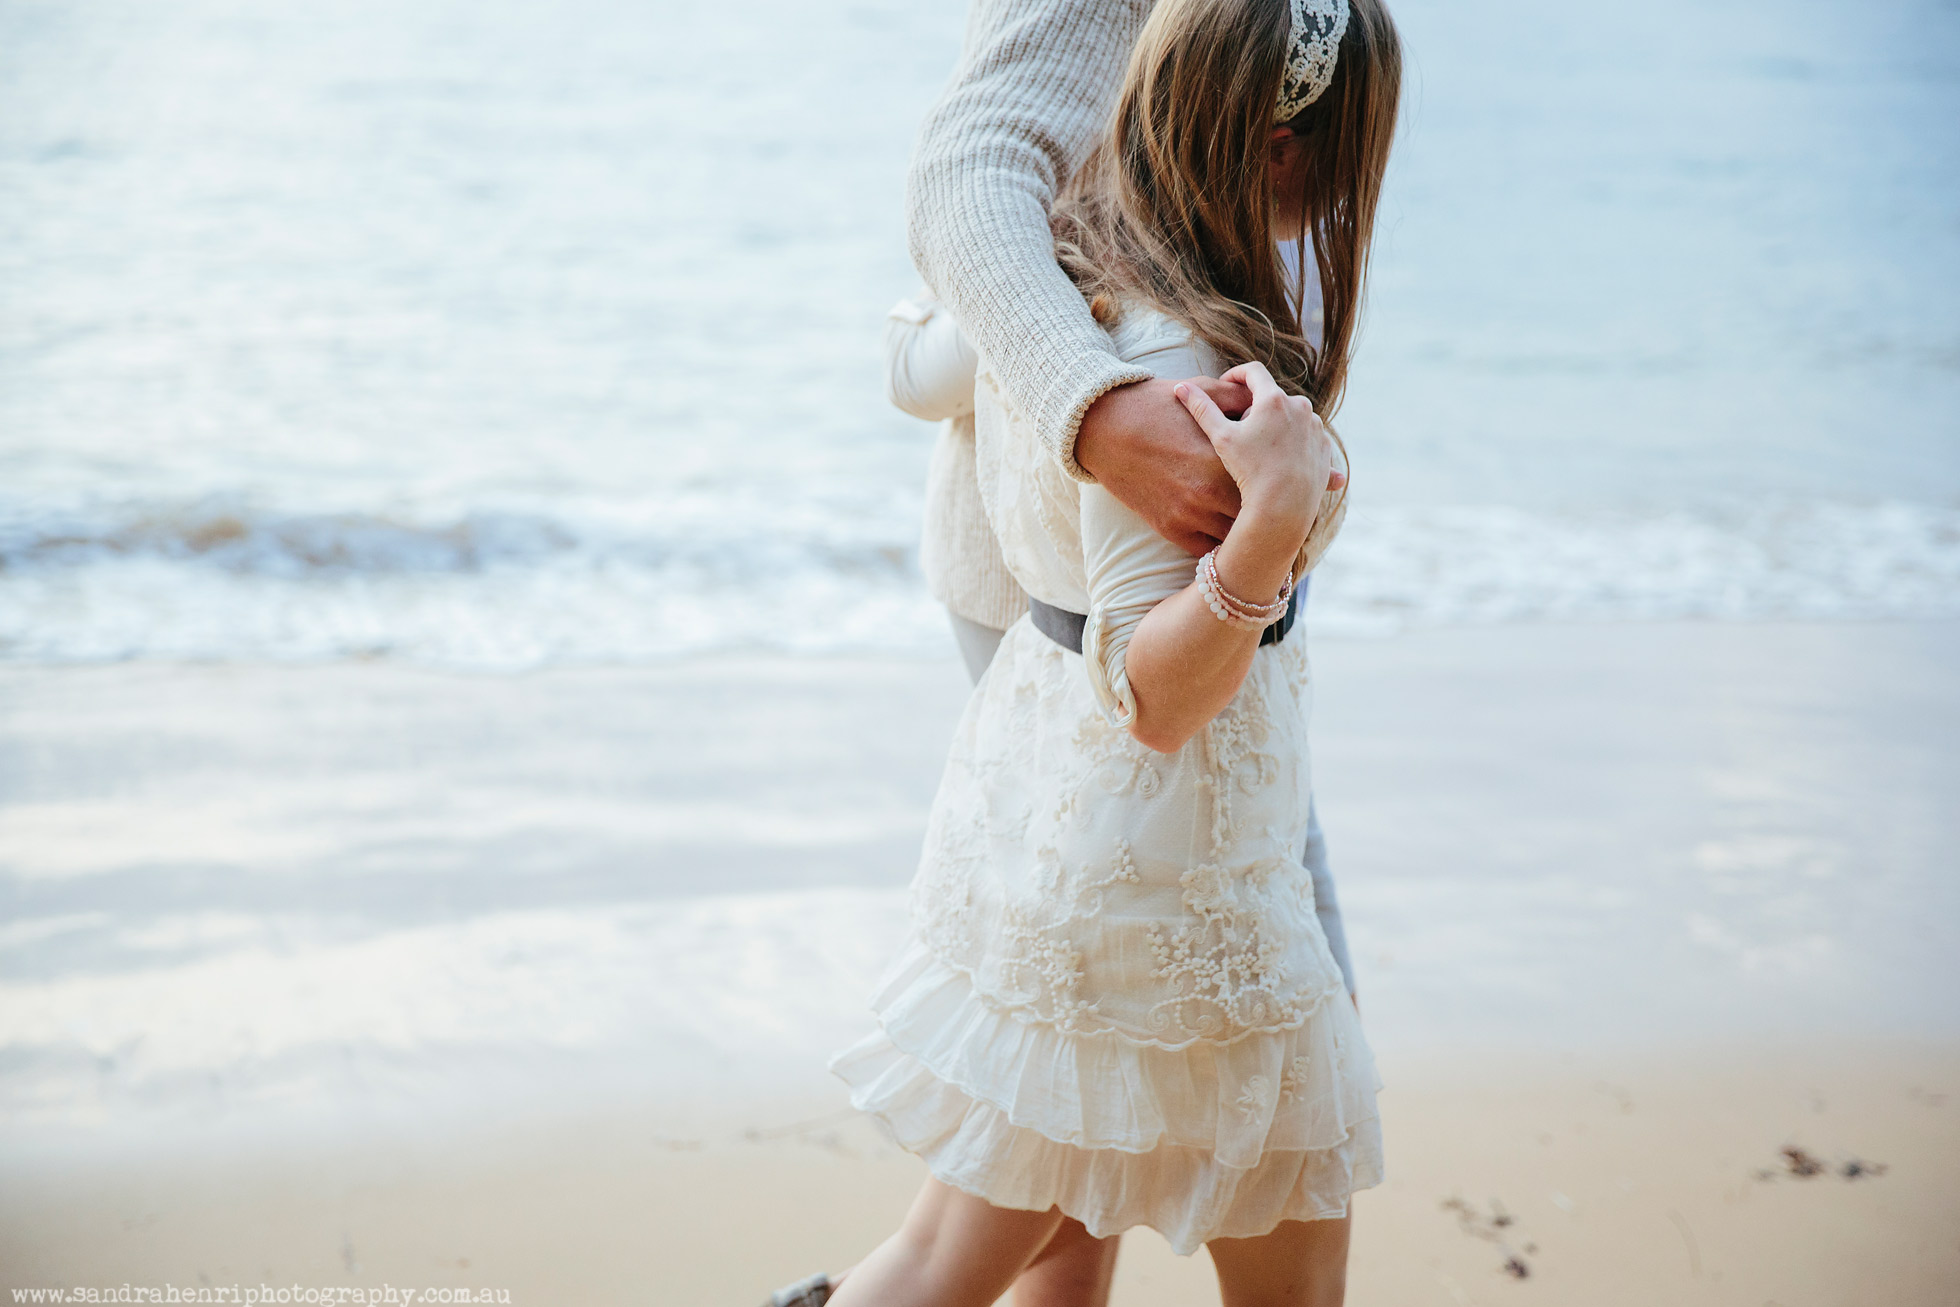 Candid-Beloved-Couples-photographer-Central-Coast-18.jpg